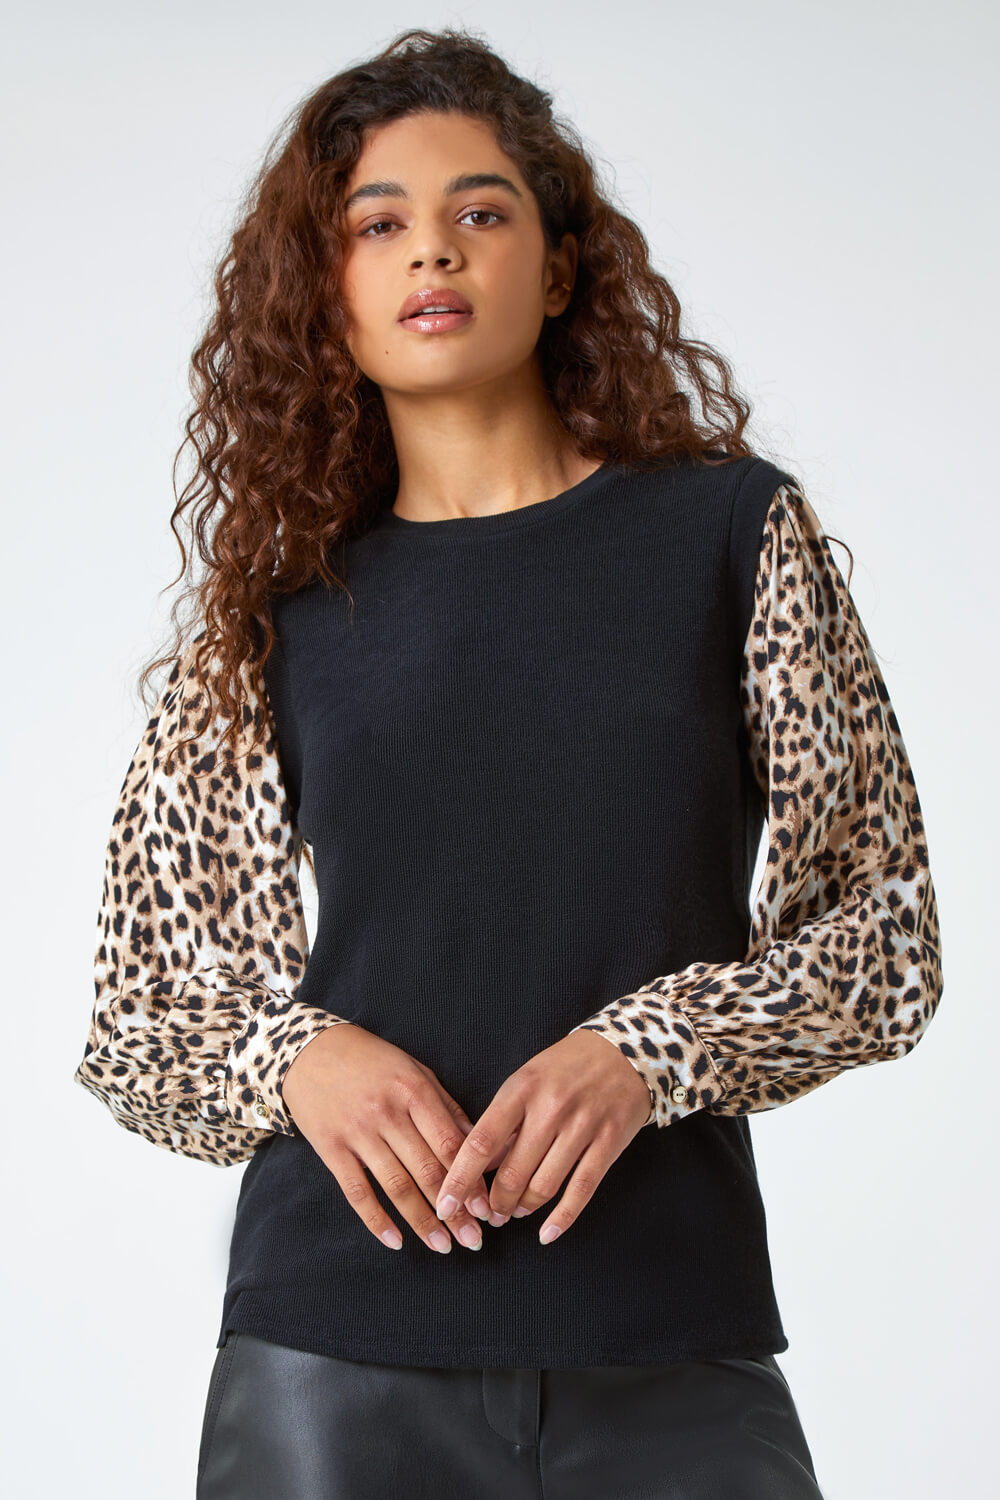 Black Animal Contrast Sleeve Stretch Top, Image 4 of 5